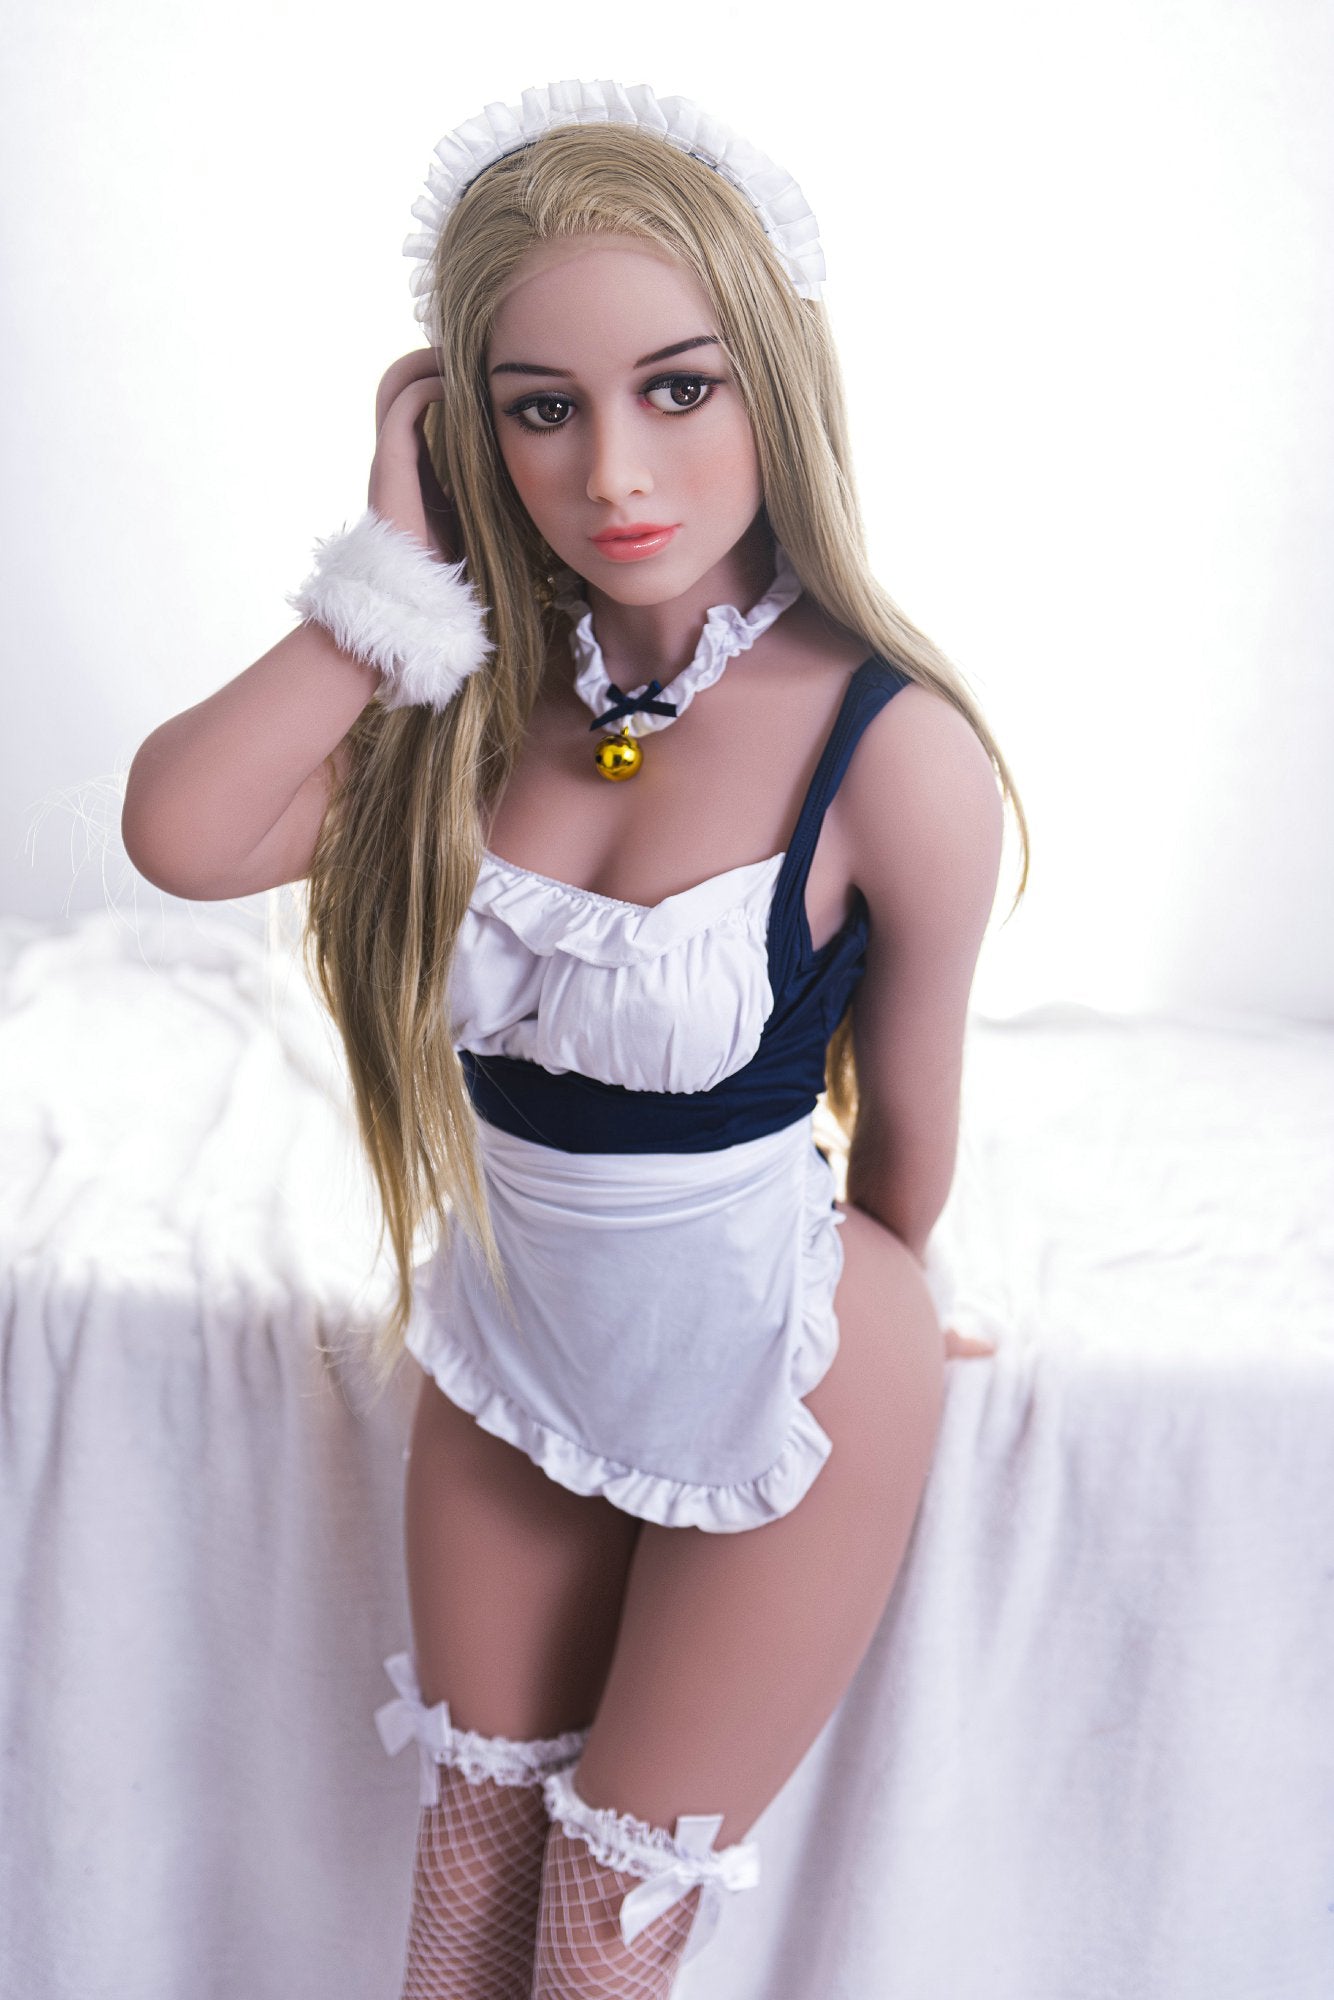 YL Doll - Real Love Doll - 4ft 11in (151cm) - Madison - Love Dolls 4U